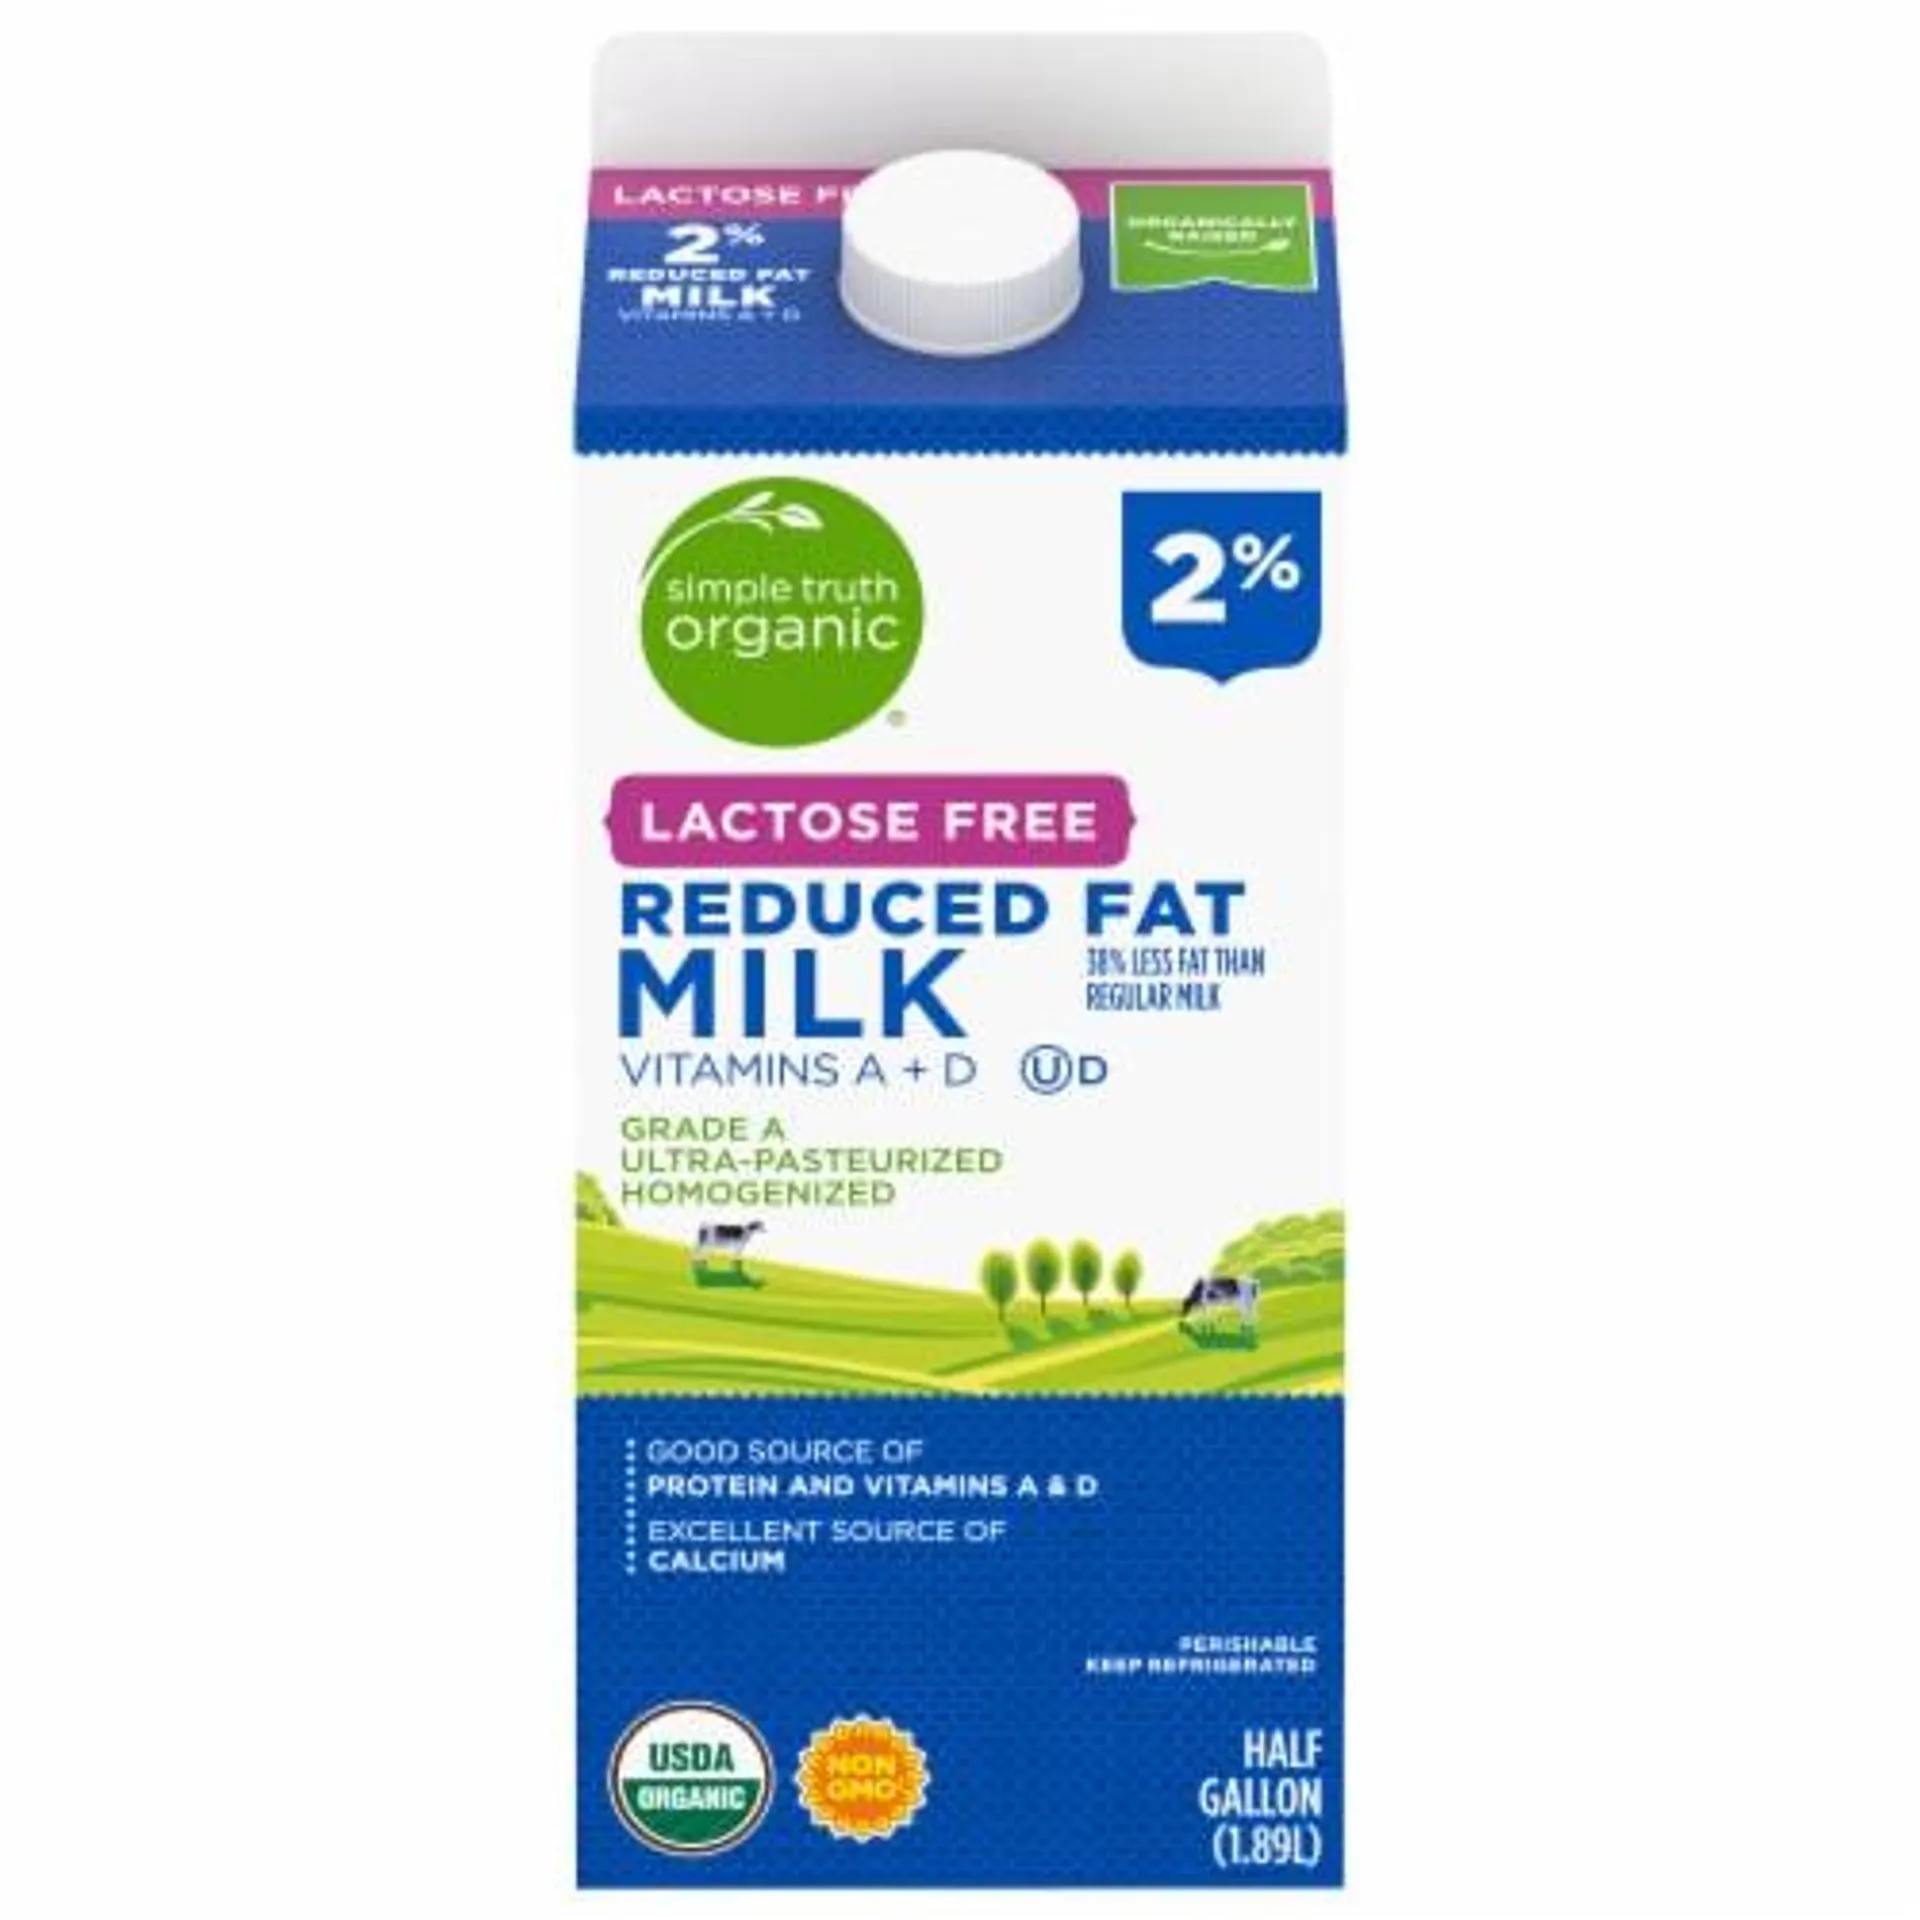 Simple Truth Organic® Lactose Free 2% Reduced Fat Milk